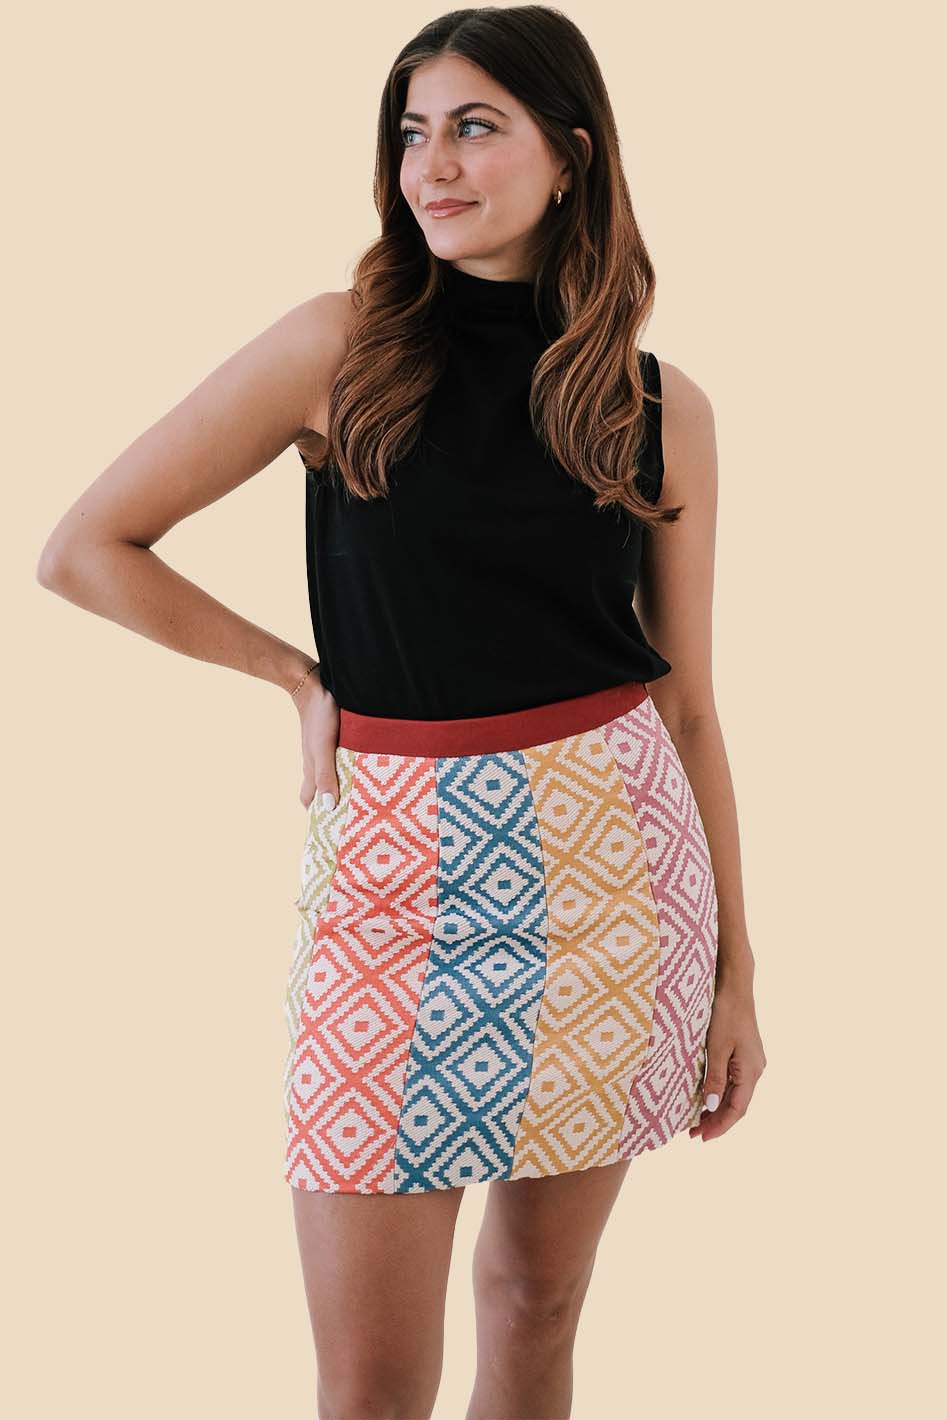 FRNCH Salome Multicolored Geometric Knit Skirt